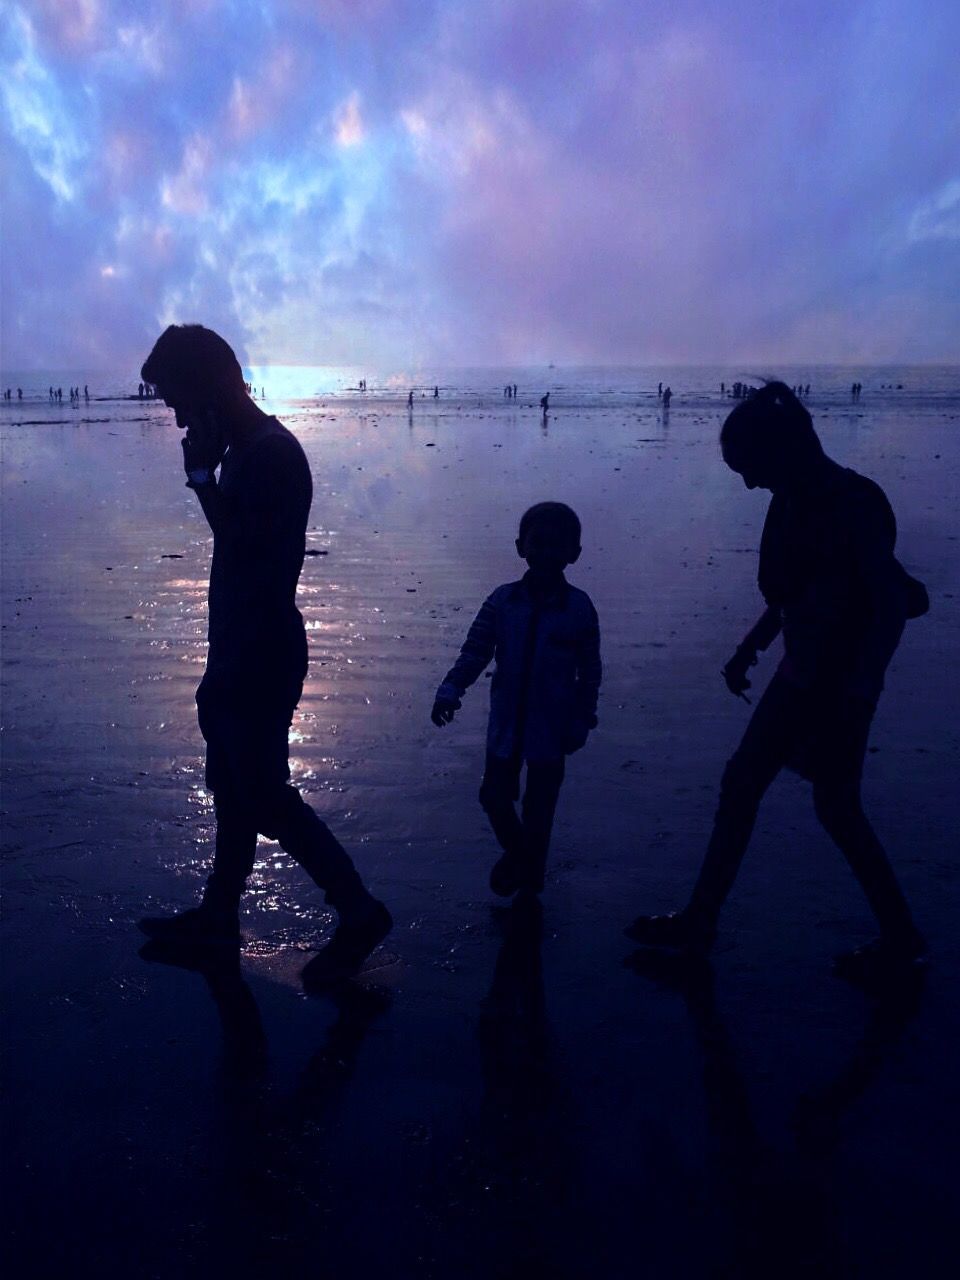 sea, beach, water, boys, child, horizon over water, childhood, silhouette, full length, two people, men, sky, leisure activity, sand, outdoors, people, adult, day